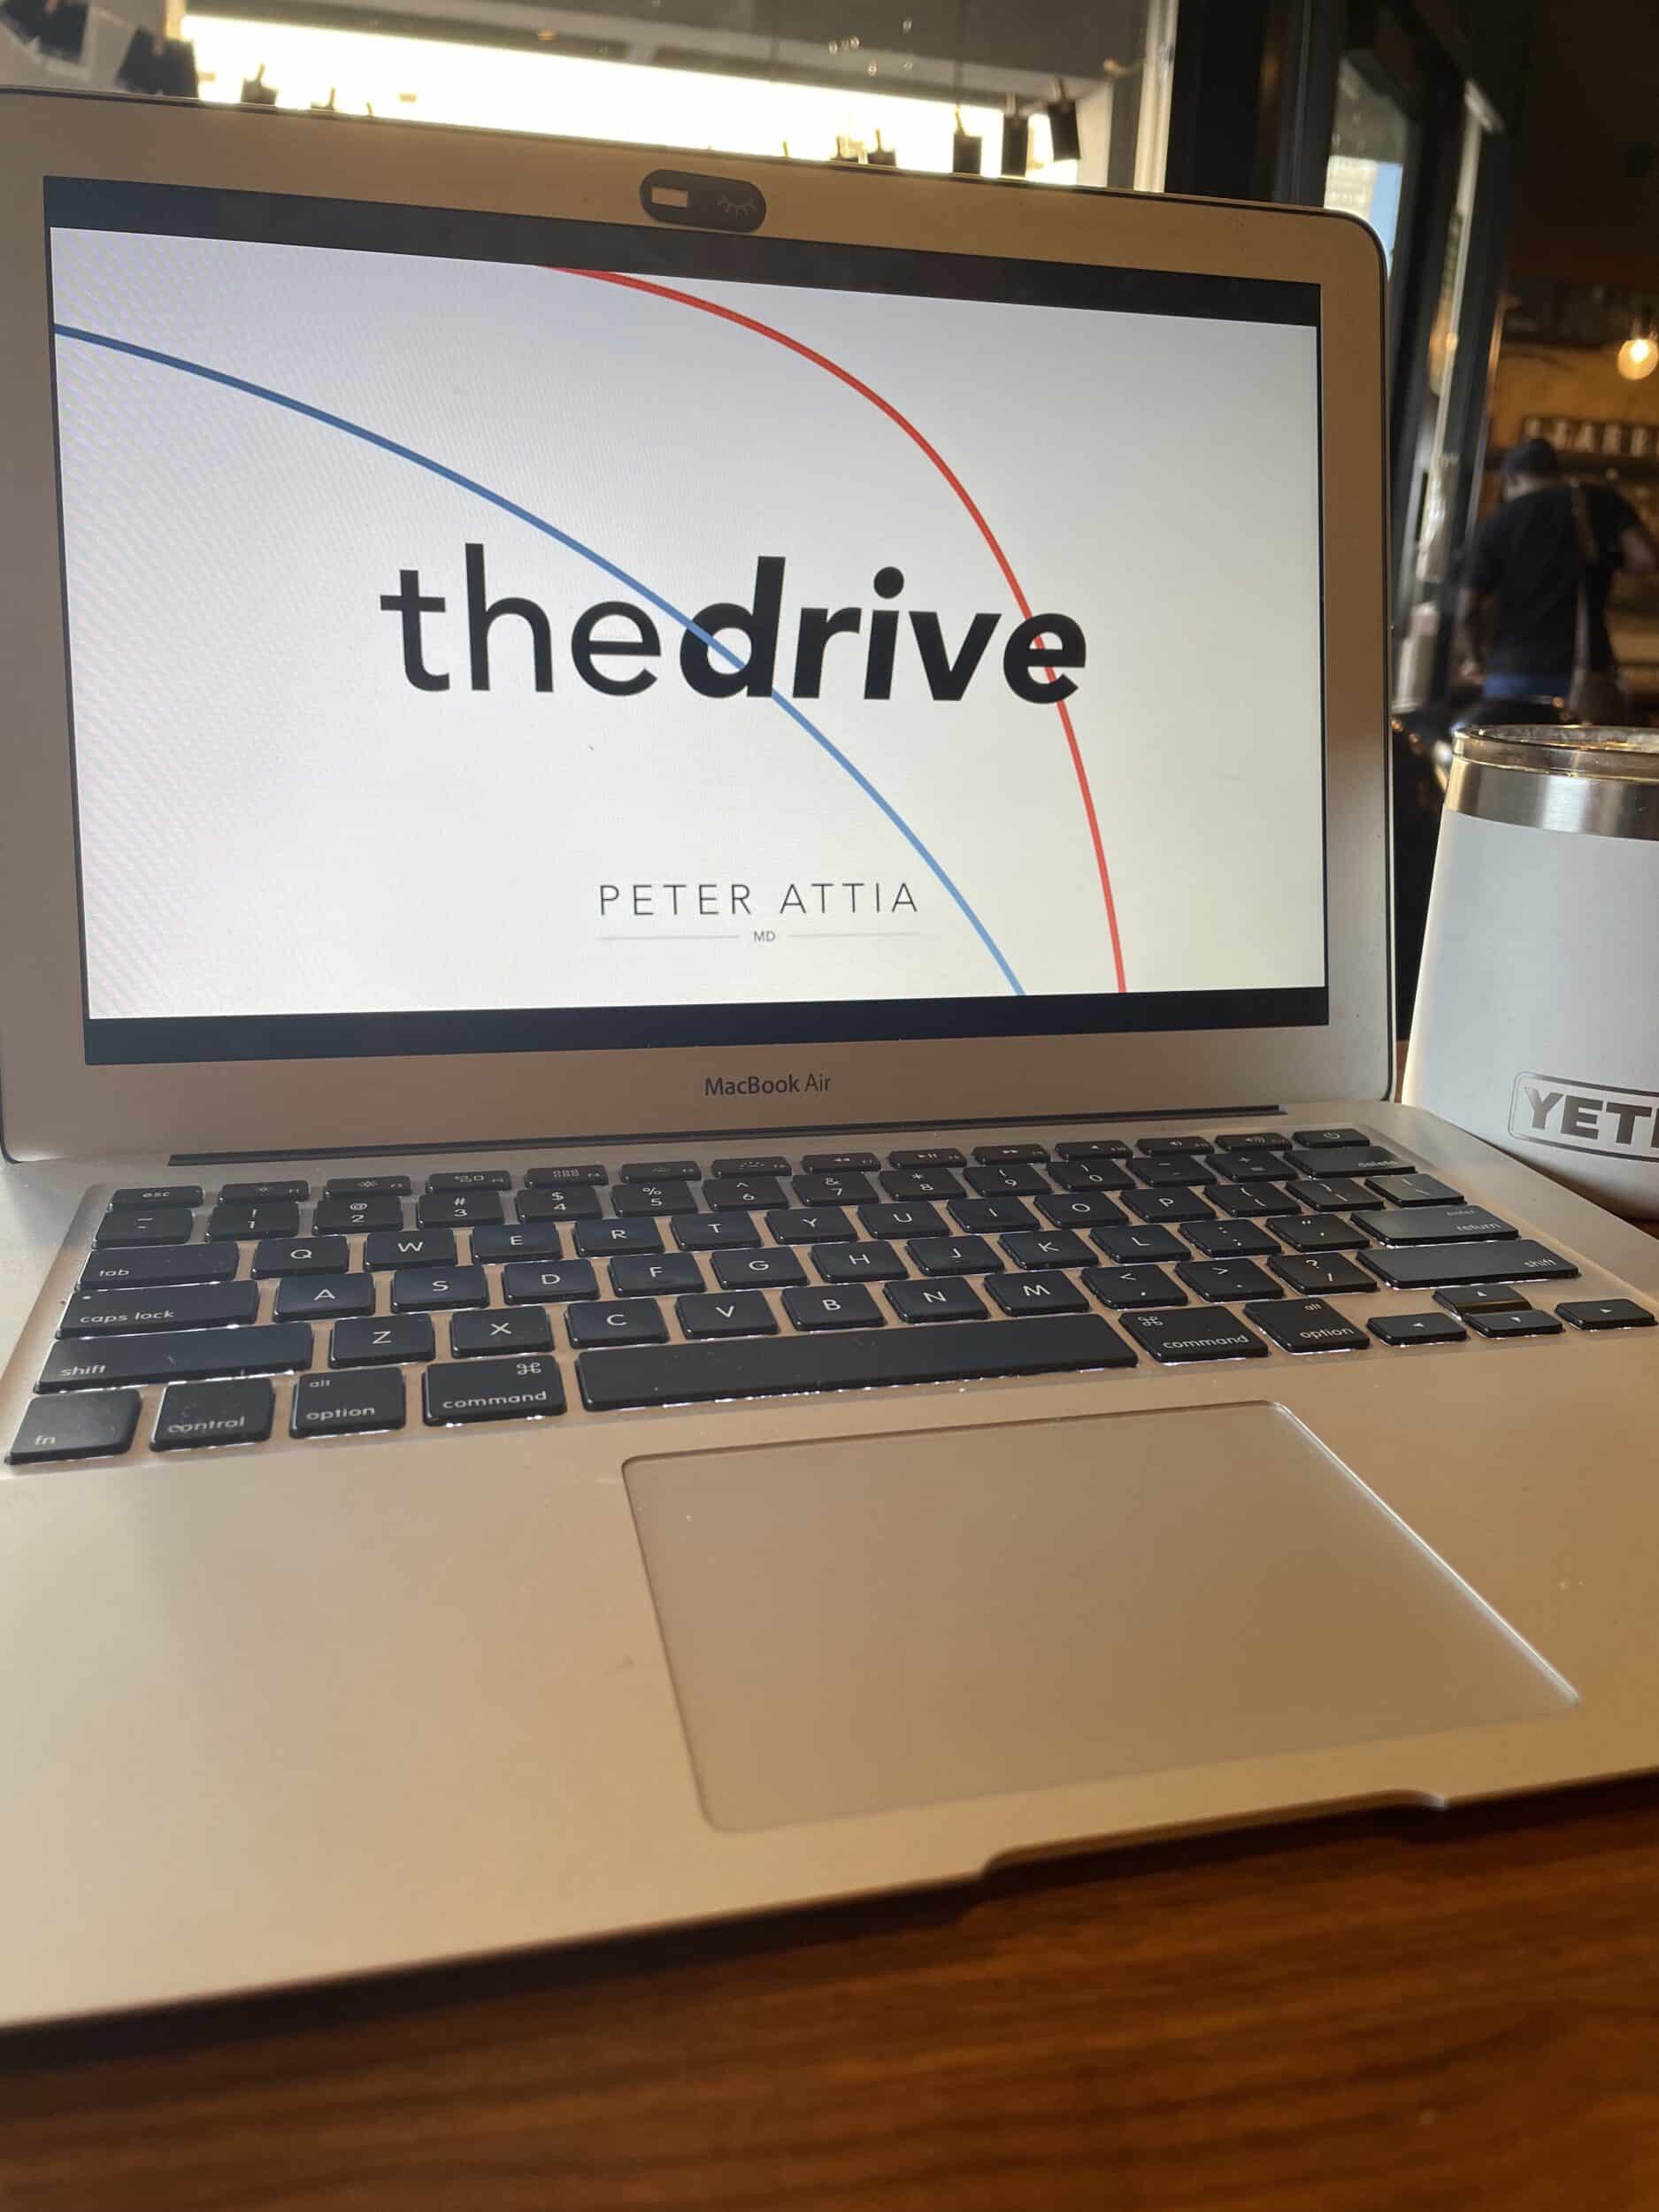 Peter Attia's "The Drive" podcast (members only feed). Hands down the most comprehensive and informative preventative health information available.